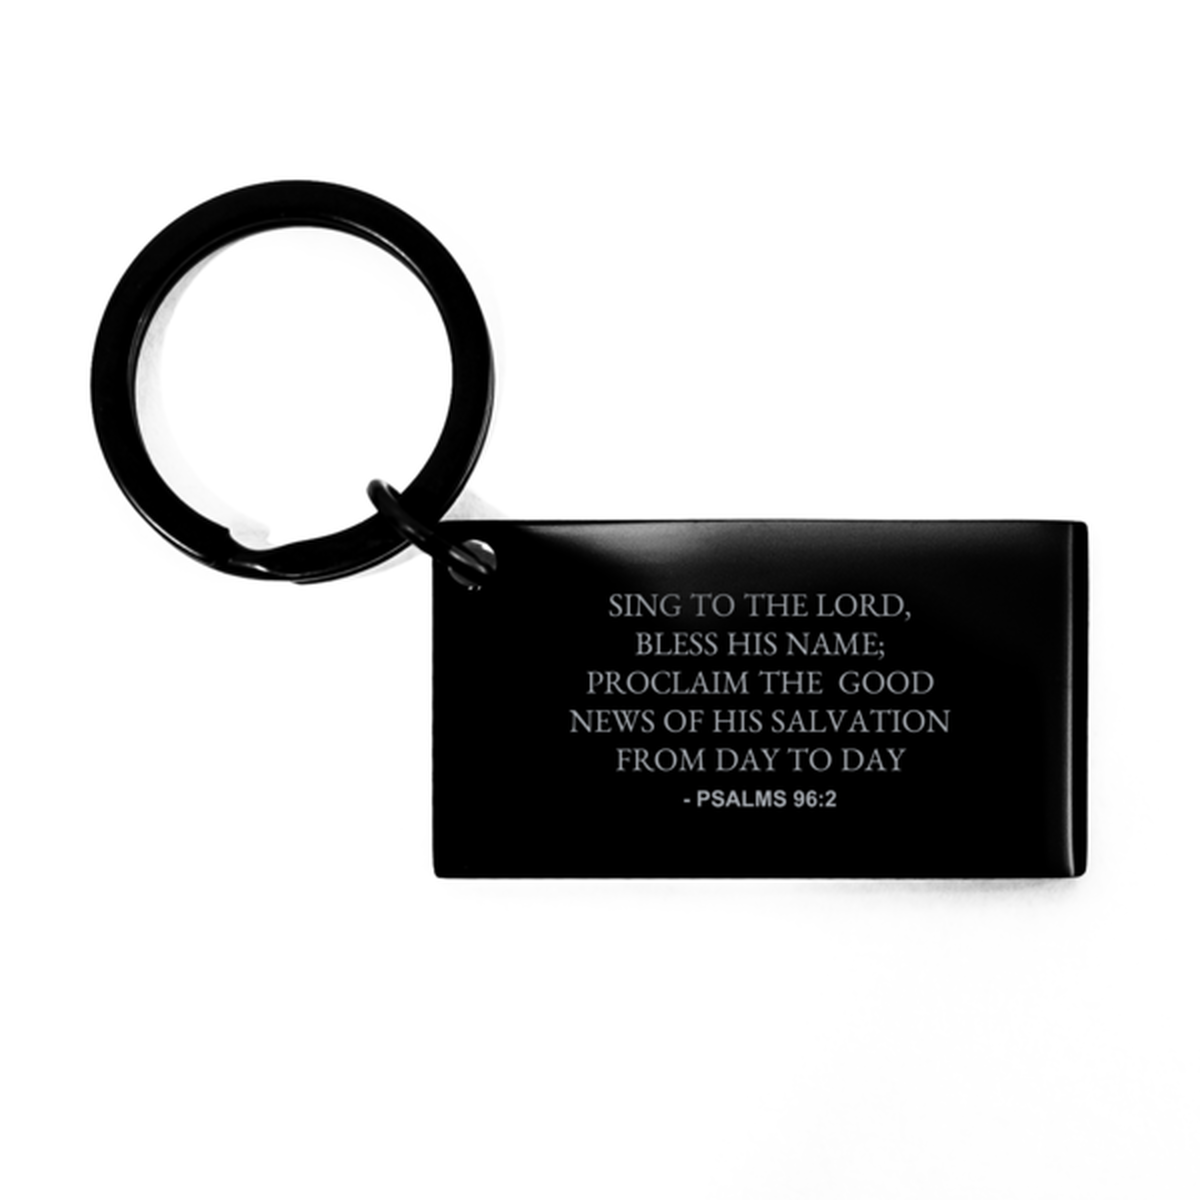 Bible Verse Black Keychain, Psalms 96:2 Sing To The Lord, Bless His Name; Proclaim The, Christian Inspirational Key Ring Gifts For Men Women